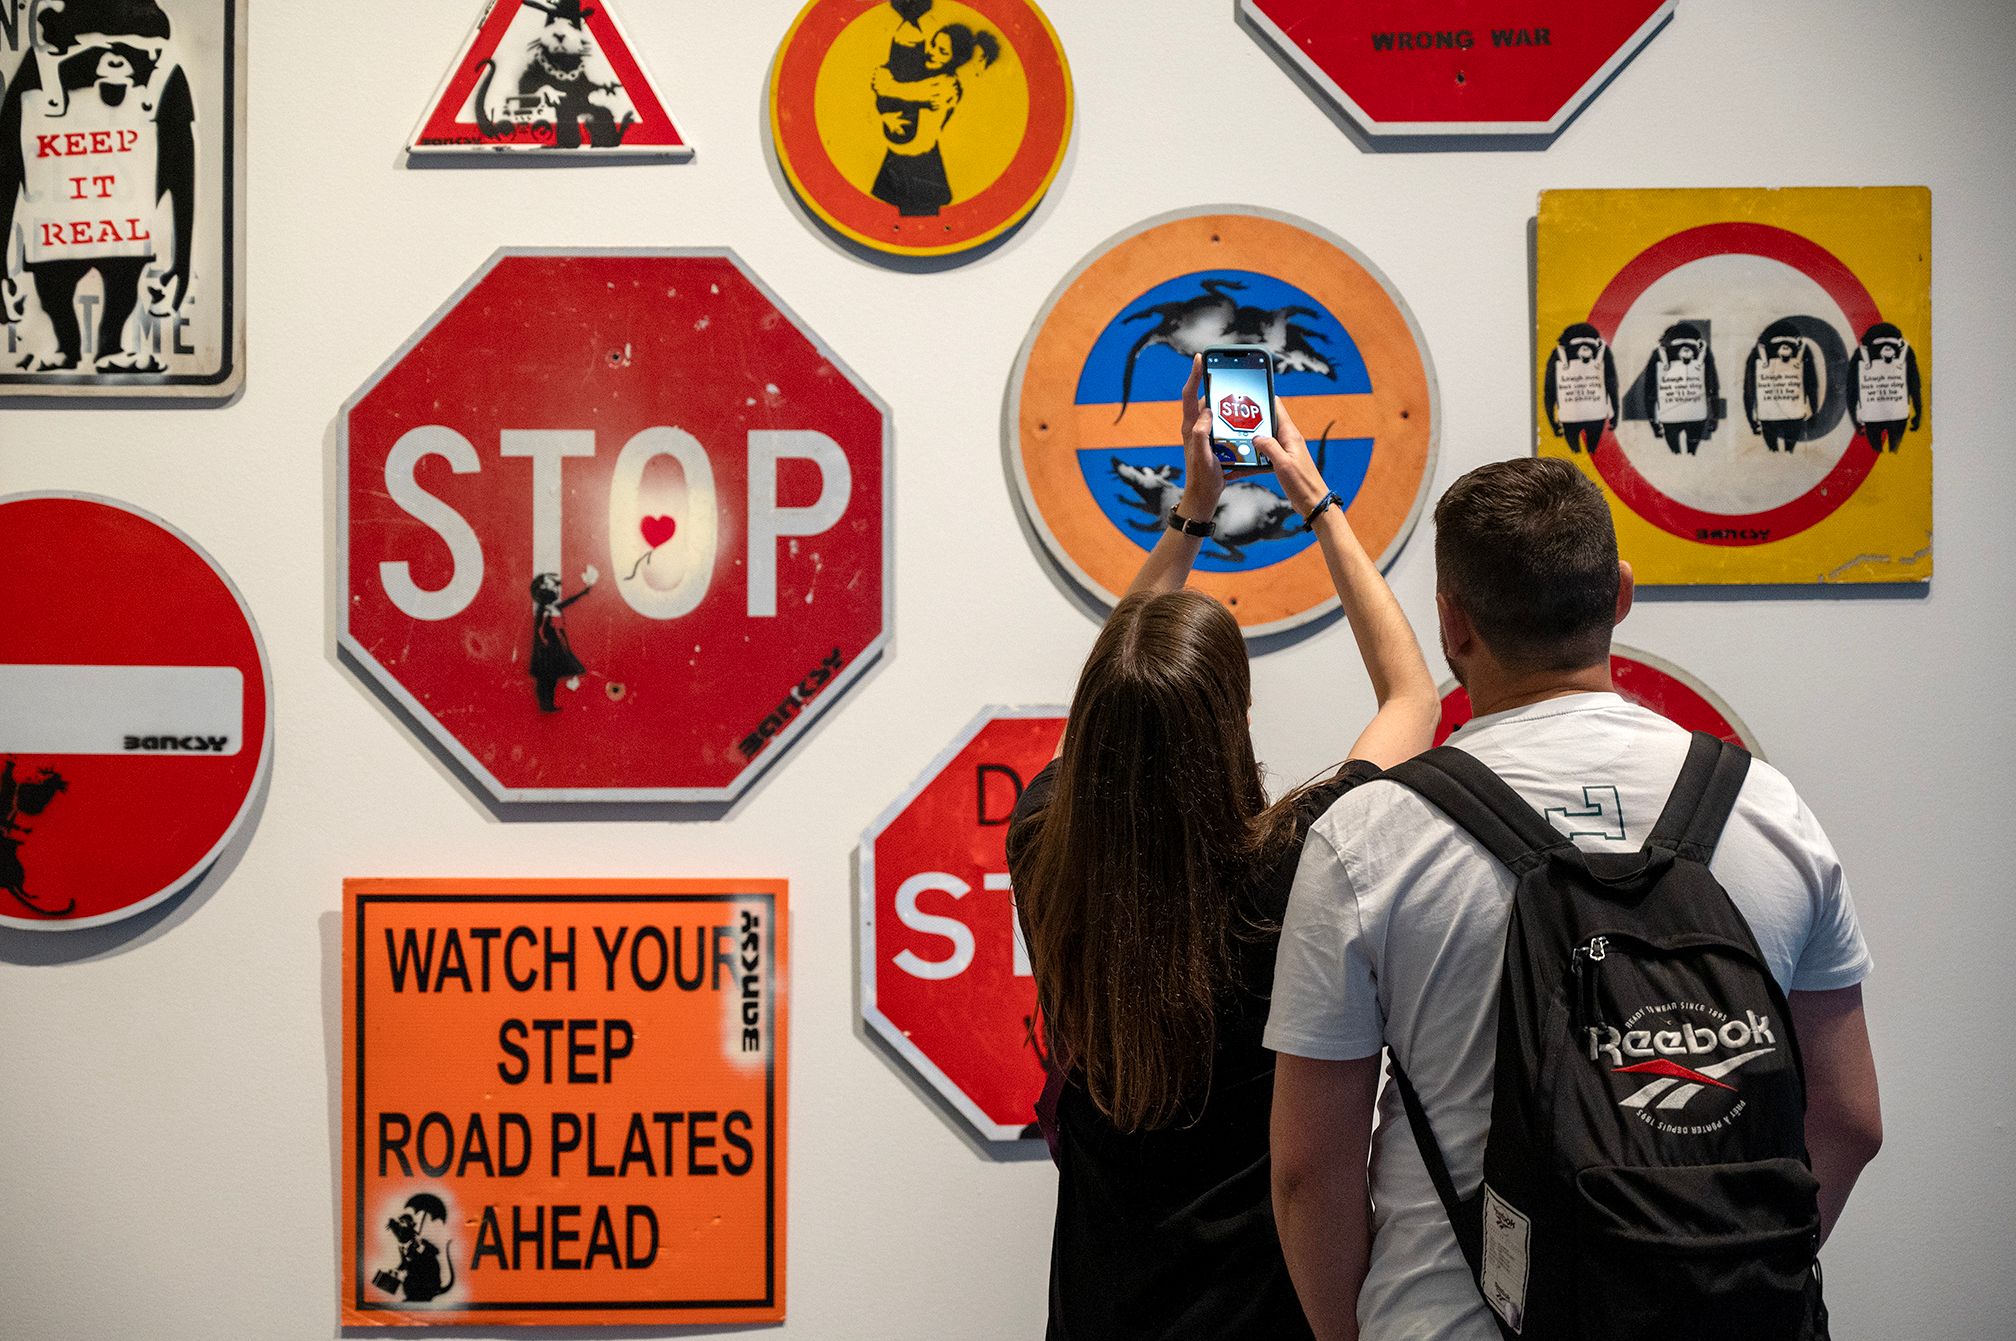 Two people stand in front of a wall of Banksy artwork, which includes a Stop sign, circular signs, and a sign reading 'WATCH YOUR STEP ROAD PLATES AHEAD'